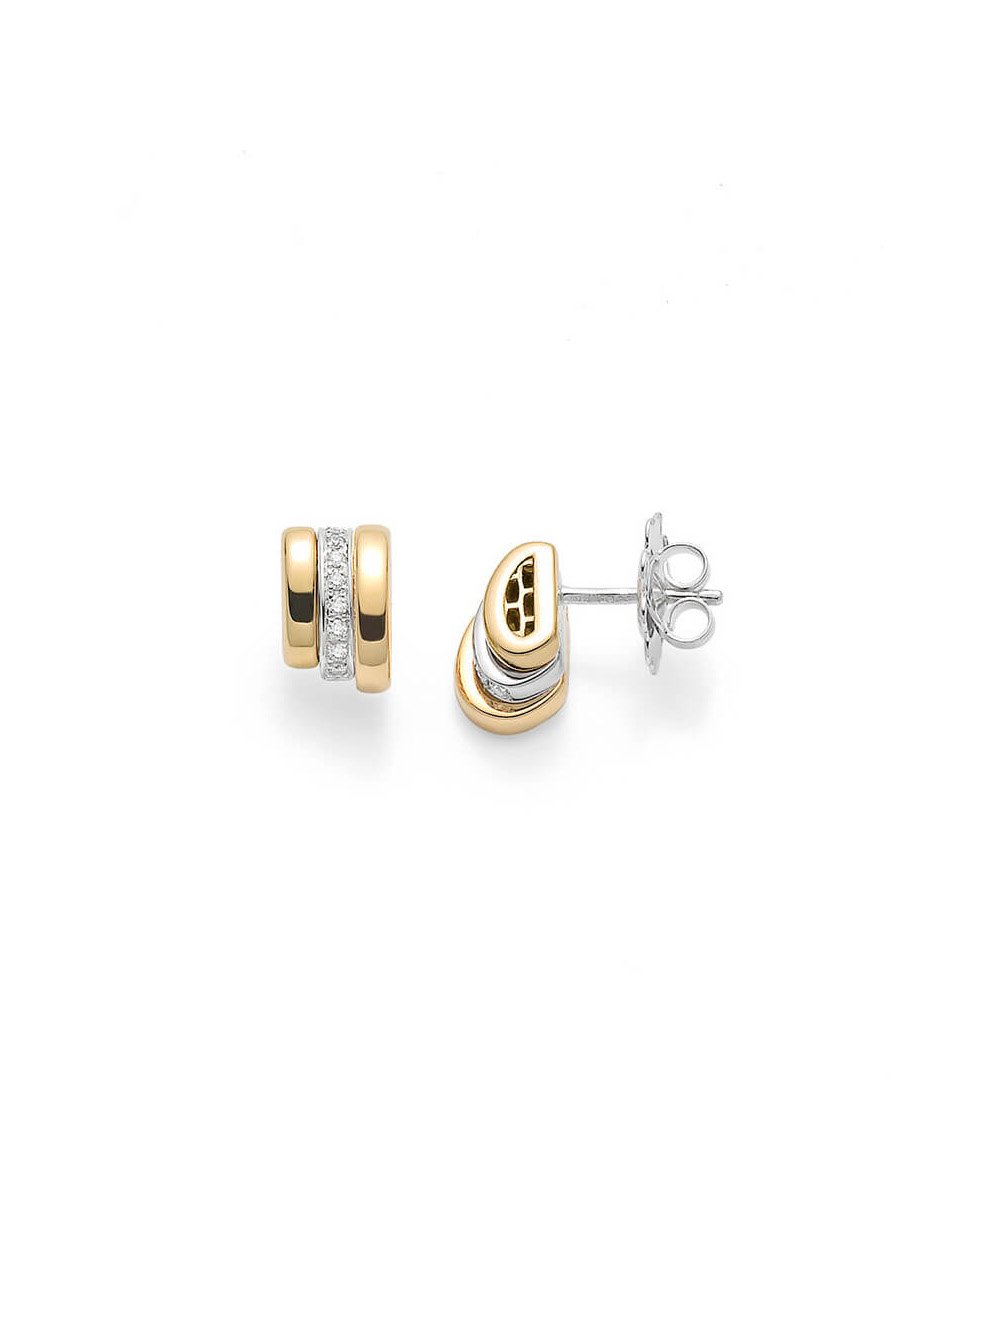 Fope Prima Earrings in 18ct Yellow & White Gold with Diamonds